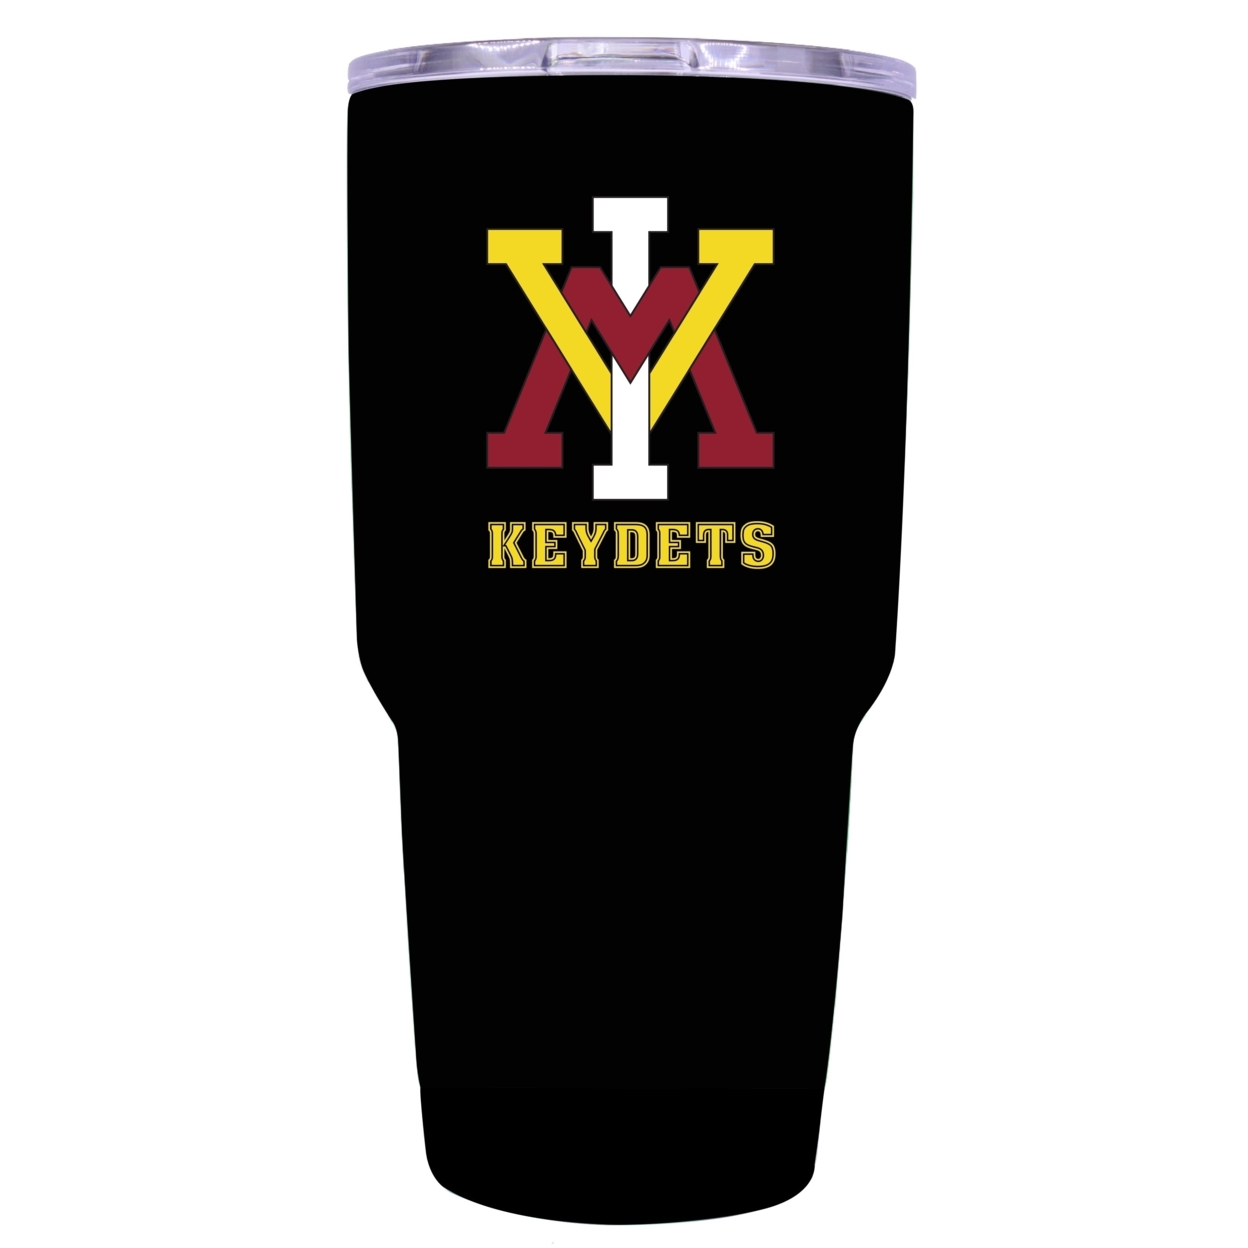 VMI Keydets 24 Oz Choose Your Color Insulated Stainless Steel Tumbler - Black